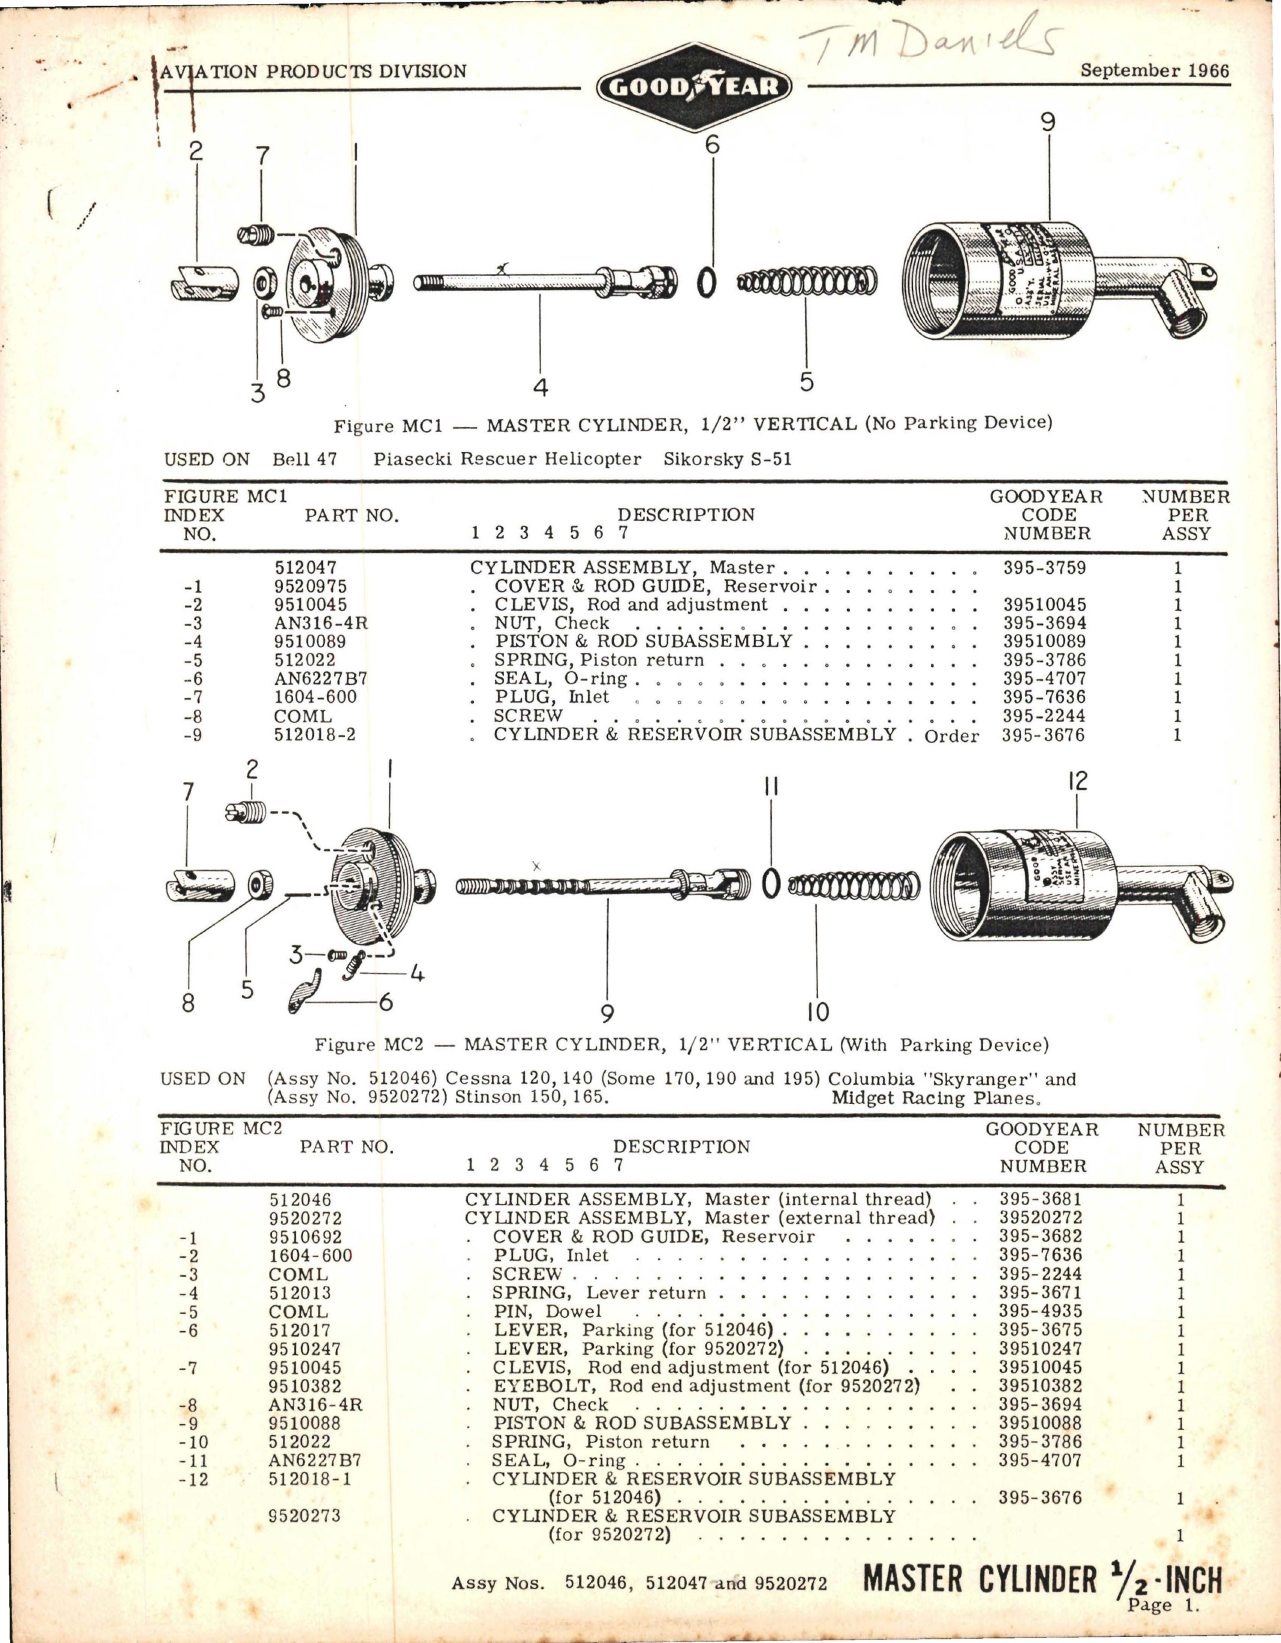 Sample page 1 from AirCorps Library document: Master Cylinder 1/2 inch Vertical- No Parking Device 